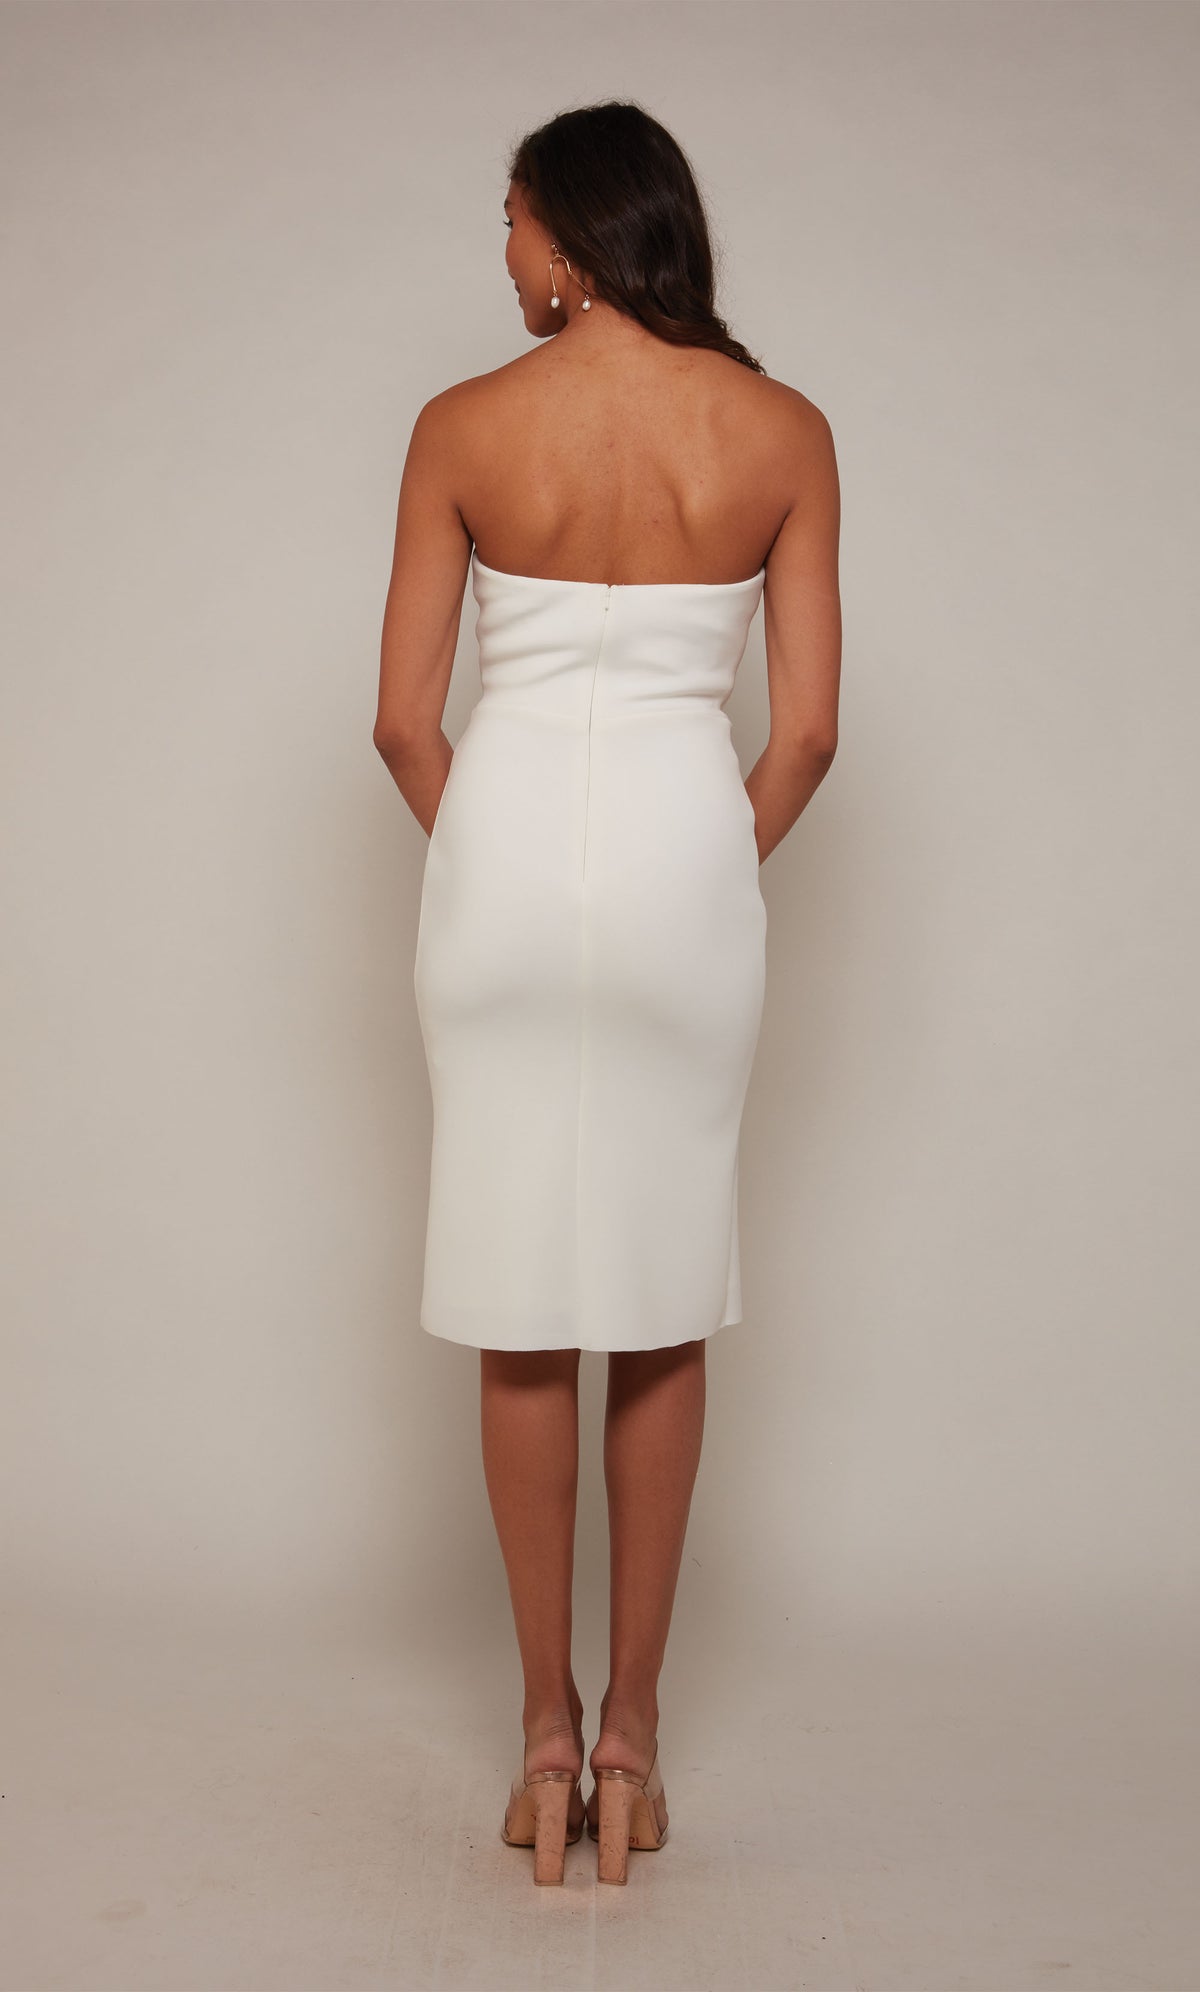 A knee length, white cocktail dress with a strapless sweetheart neckline and a zipper closure at the back.